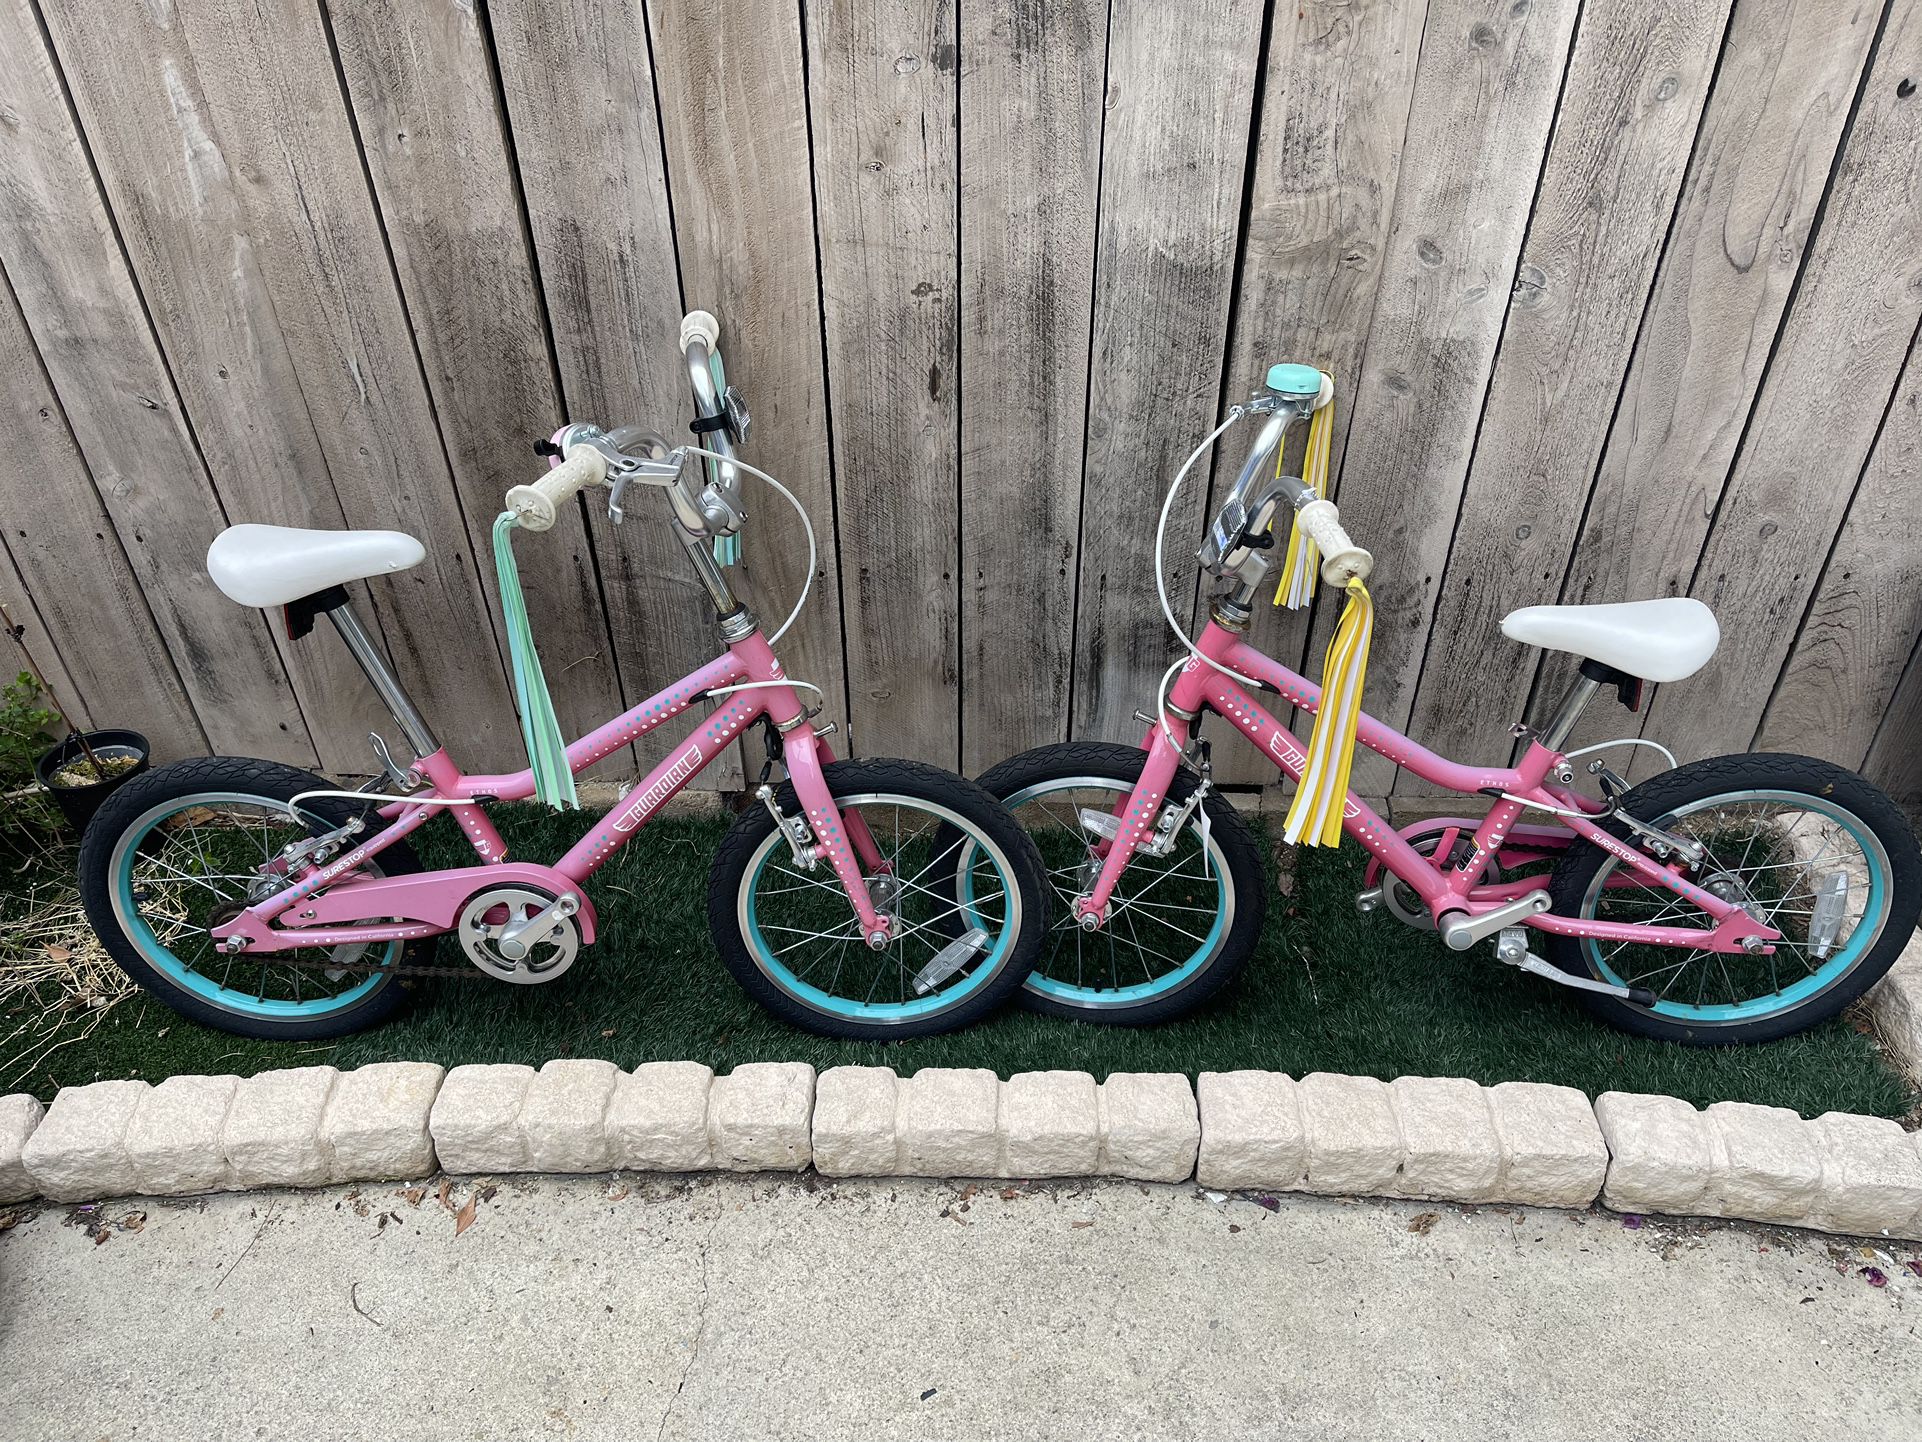 Girls Guardian Ethos 16 Inch Bicycles $70 Each 